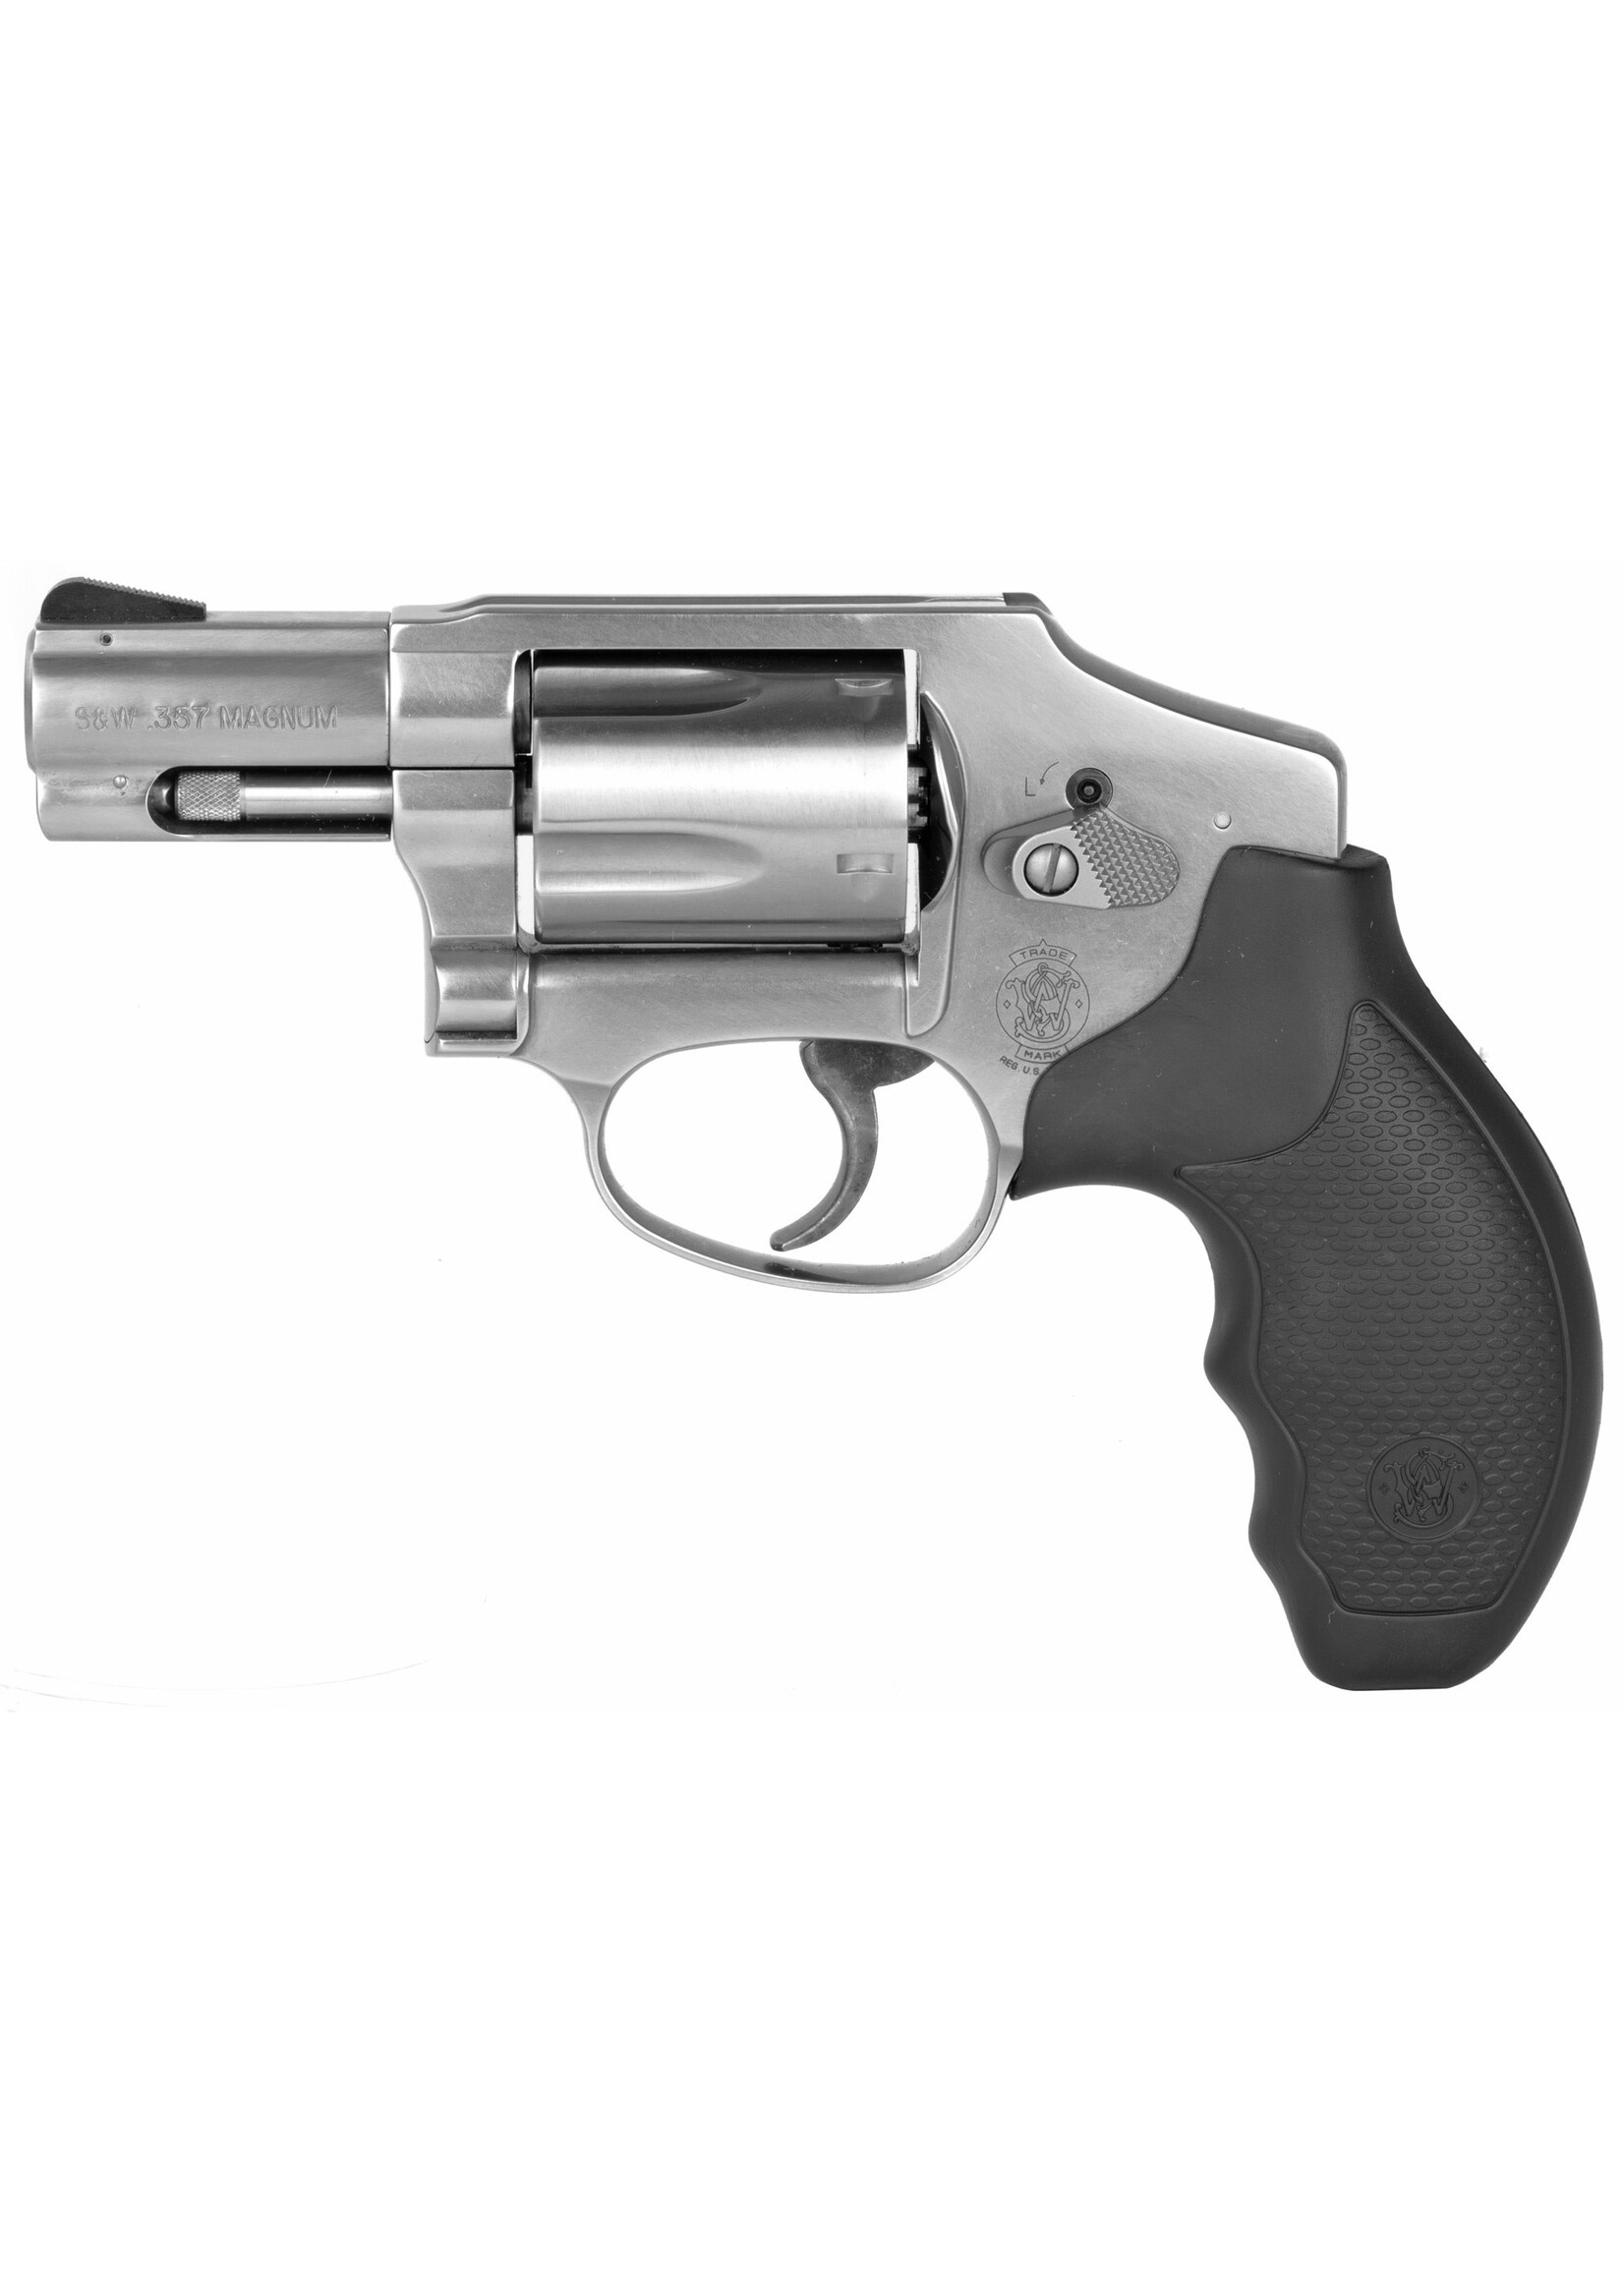 Smith and Wesson (S&W) Smith & Wesson 163690 Model 640 357 Mag or 38 S&W Spl +P 5 Shot 2.12" Stainless Steel Barrel/Cylinder, Satin Stainless Steel J-Frame, Snag-free Enclosed Hammer, Internal Lock